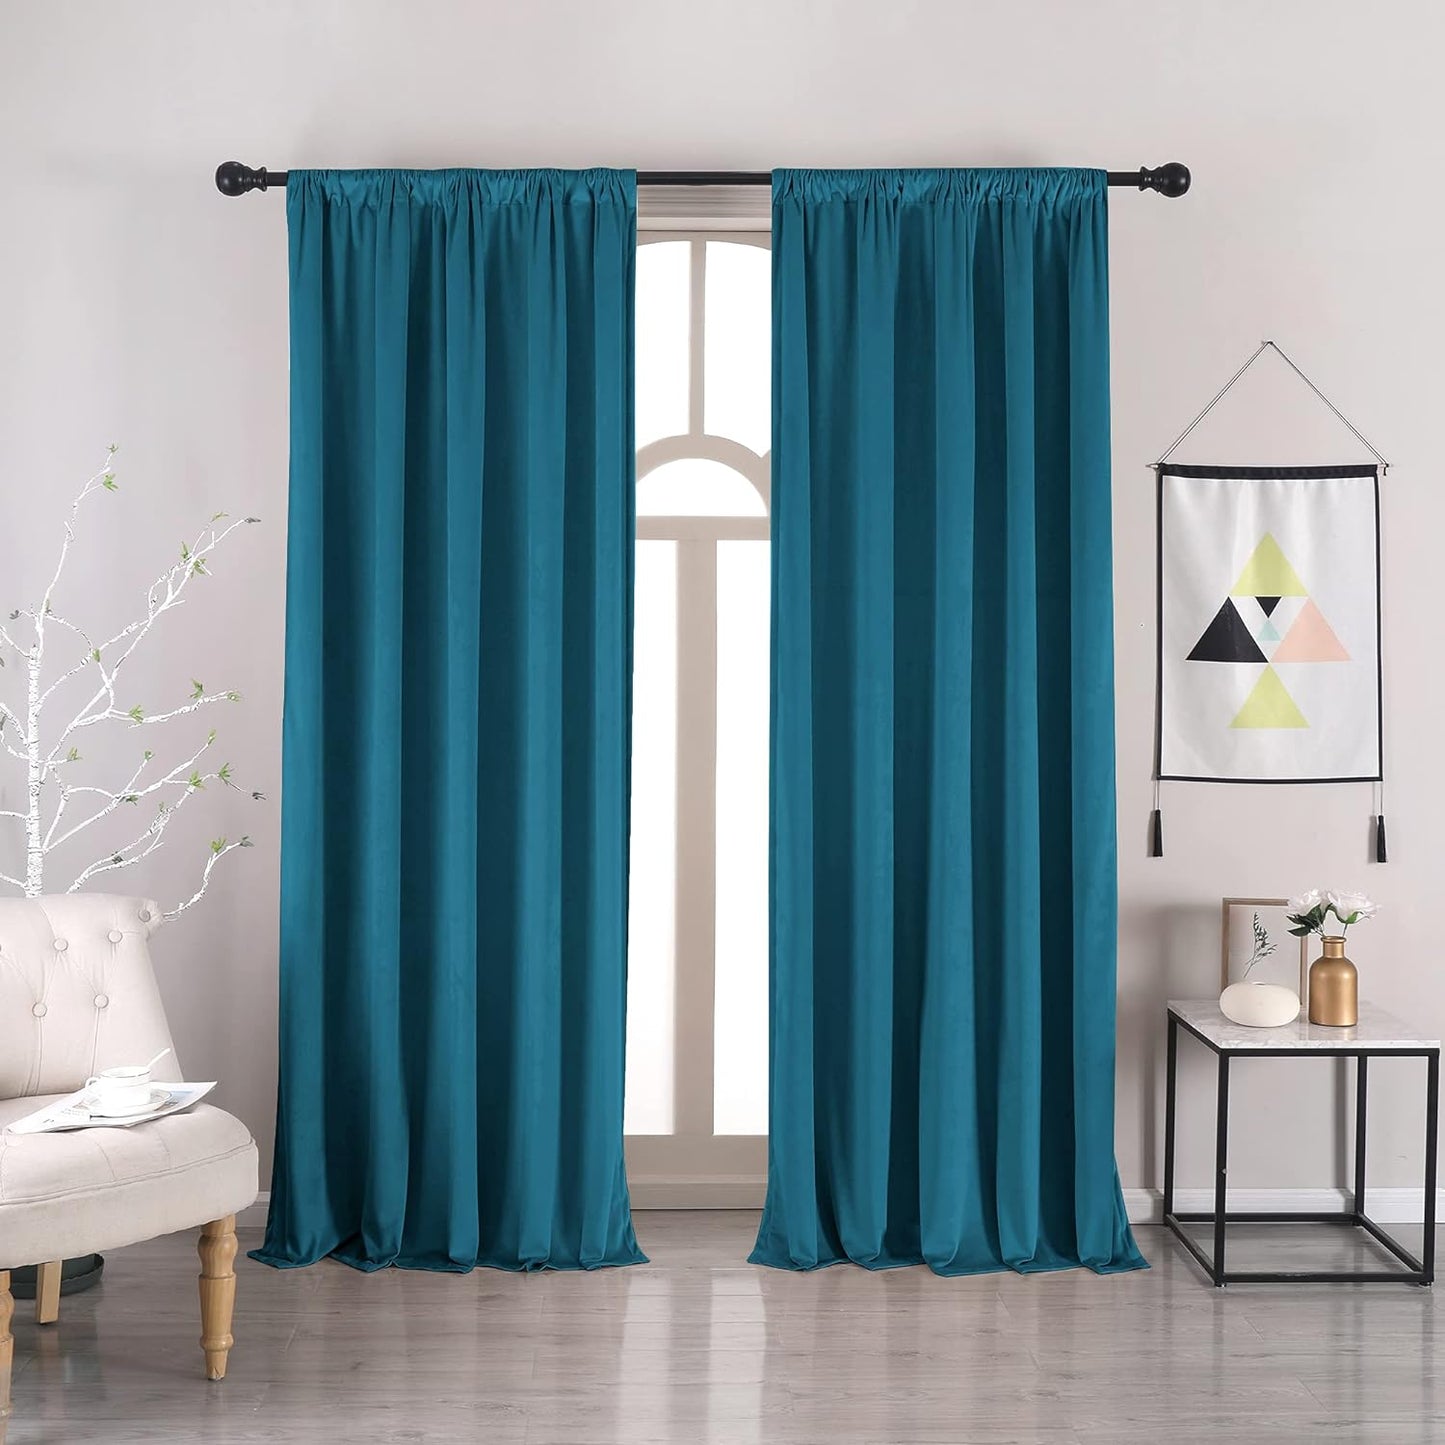 Nanbowang Green Velvet Curtains 63 Inches Long Dark Green Light Blocking Rod Pocket Window Curtain Panels Set of 2 Heat Insulated Curtains Thermal Curtain Panels for Bedroom  nanbowang Stoneblue 42"X84" 